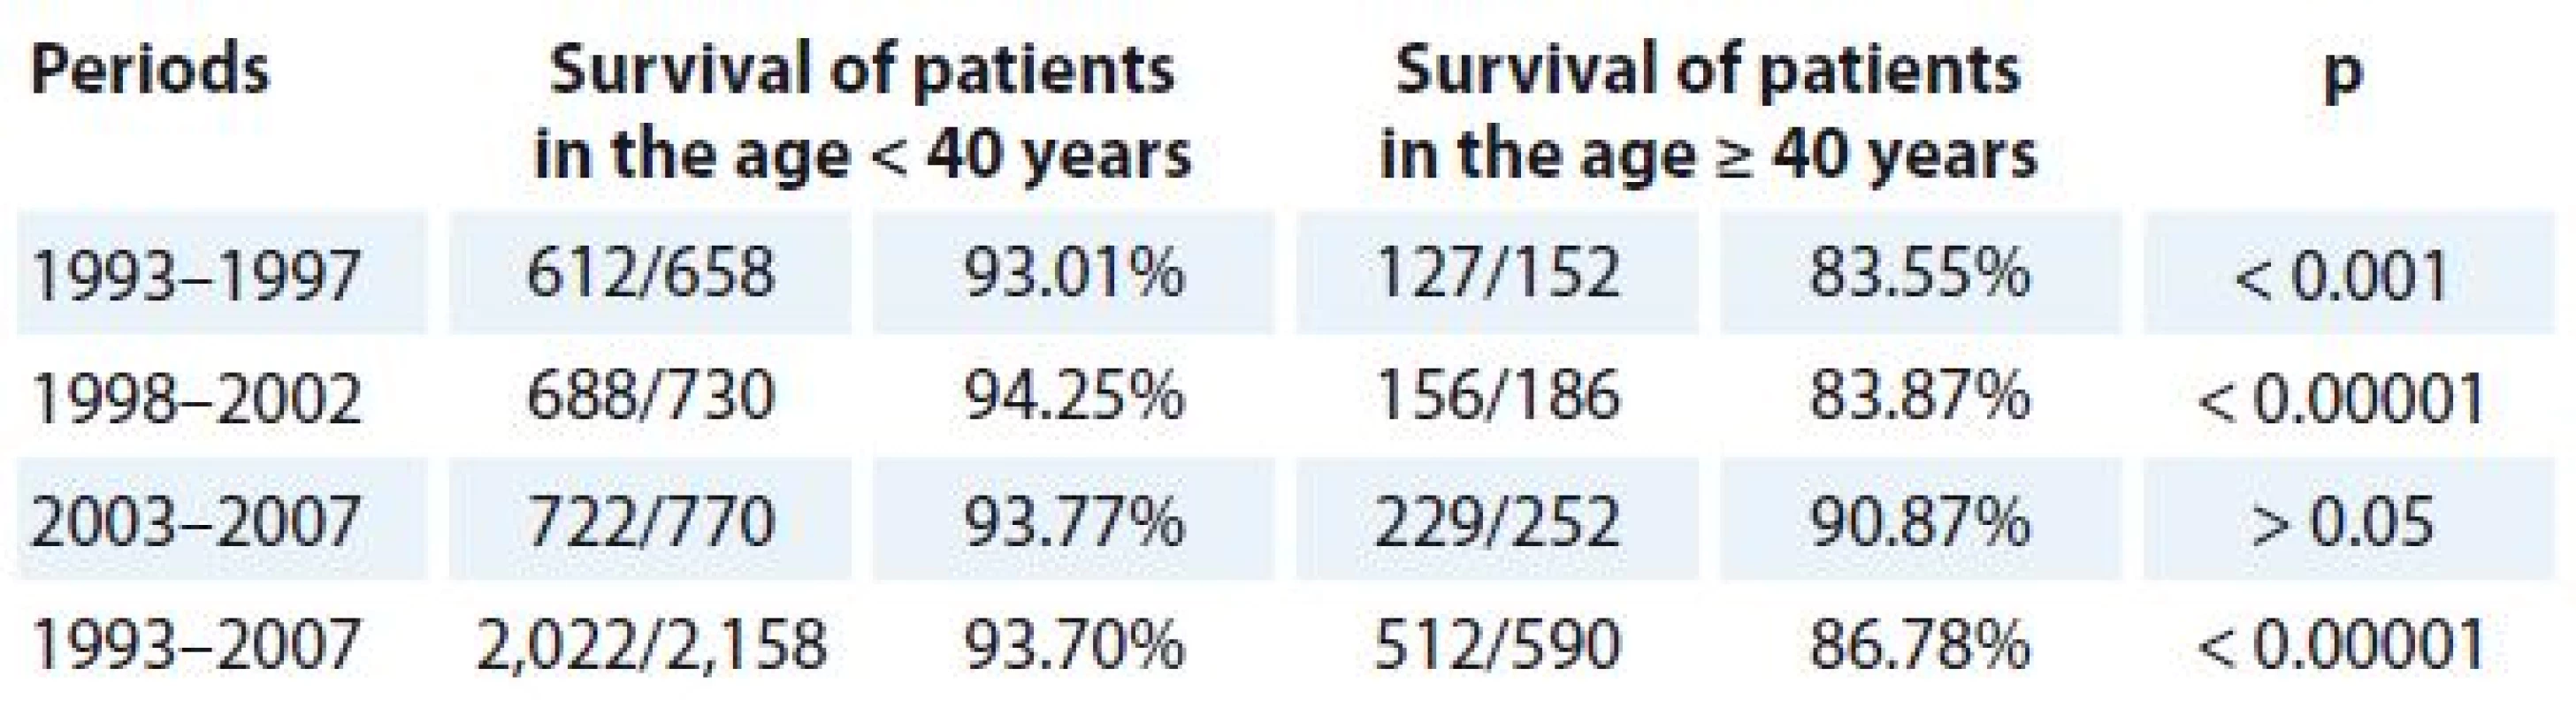 Five-year survival for TC patients by age groups and year periods.